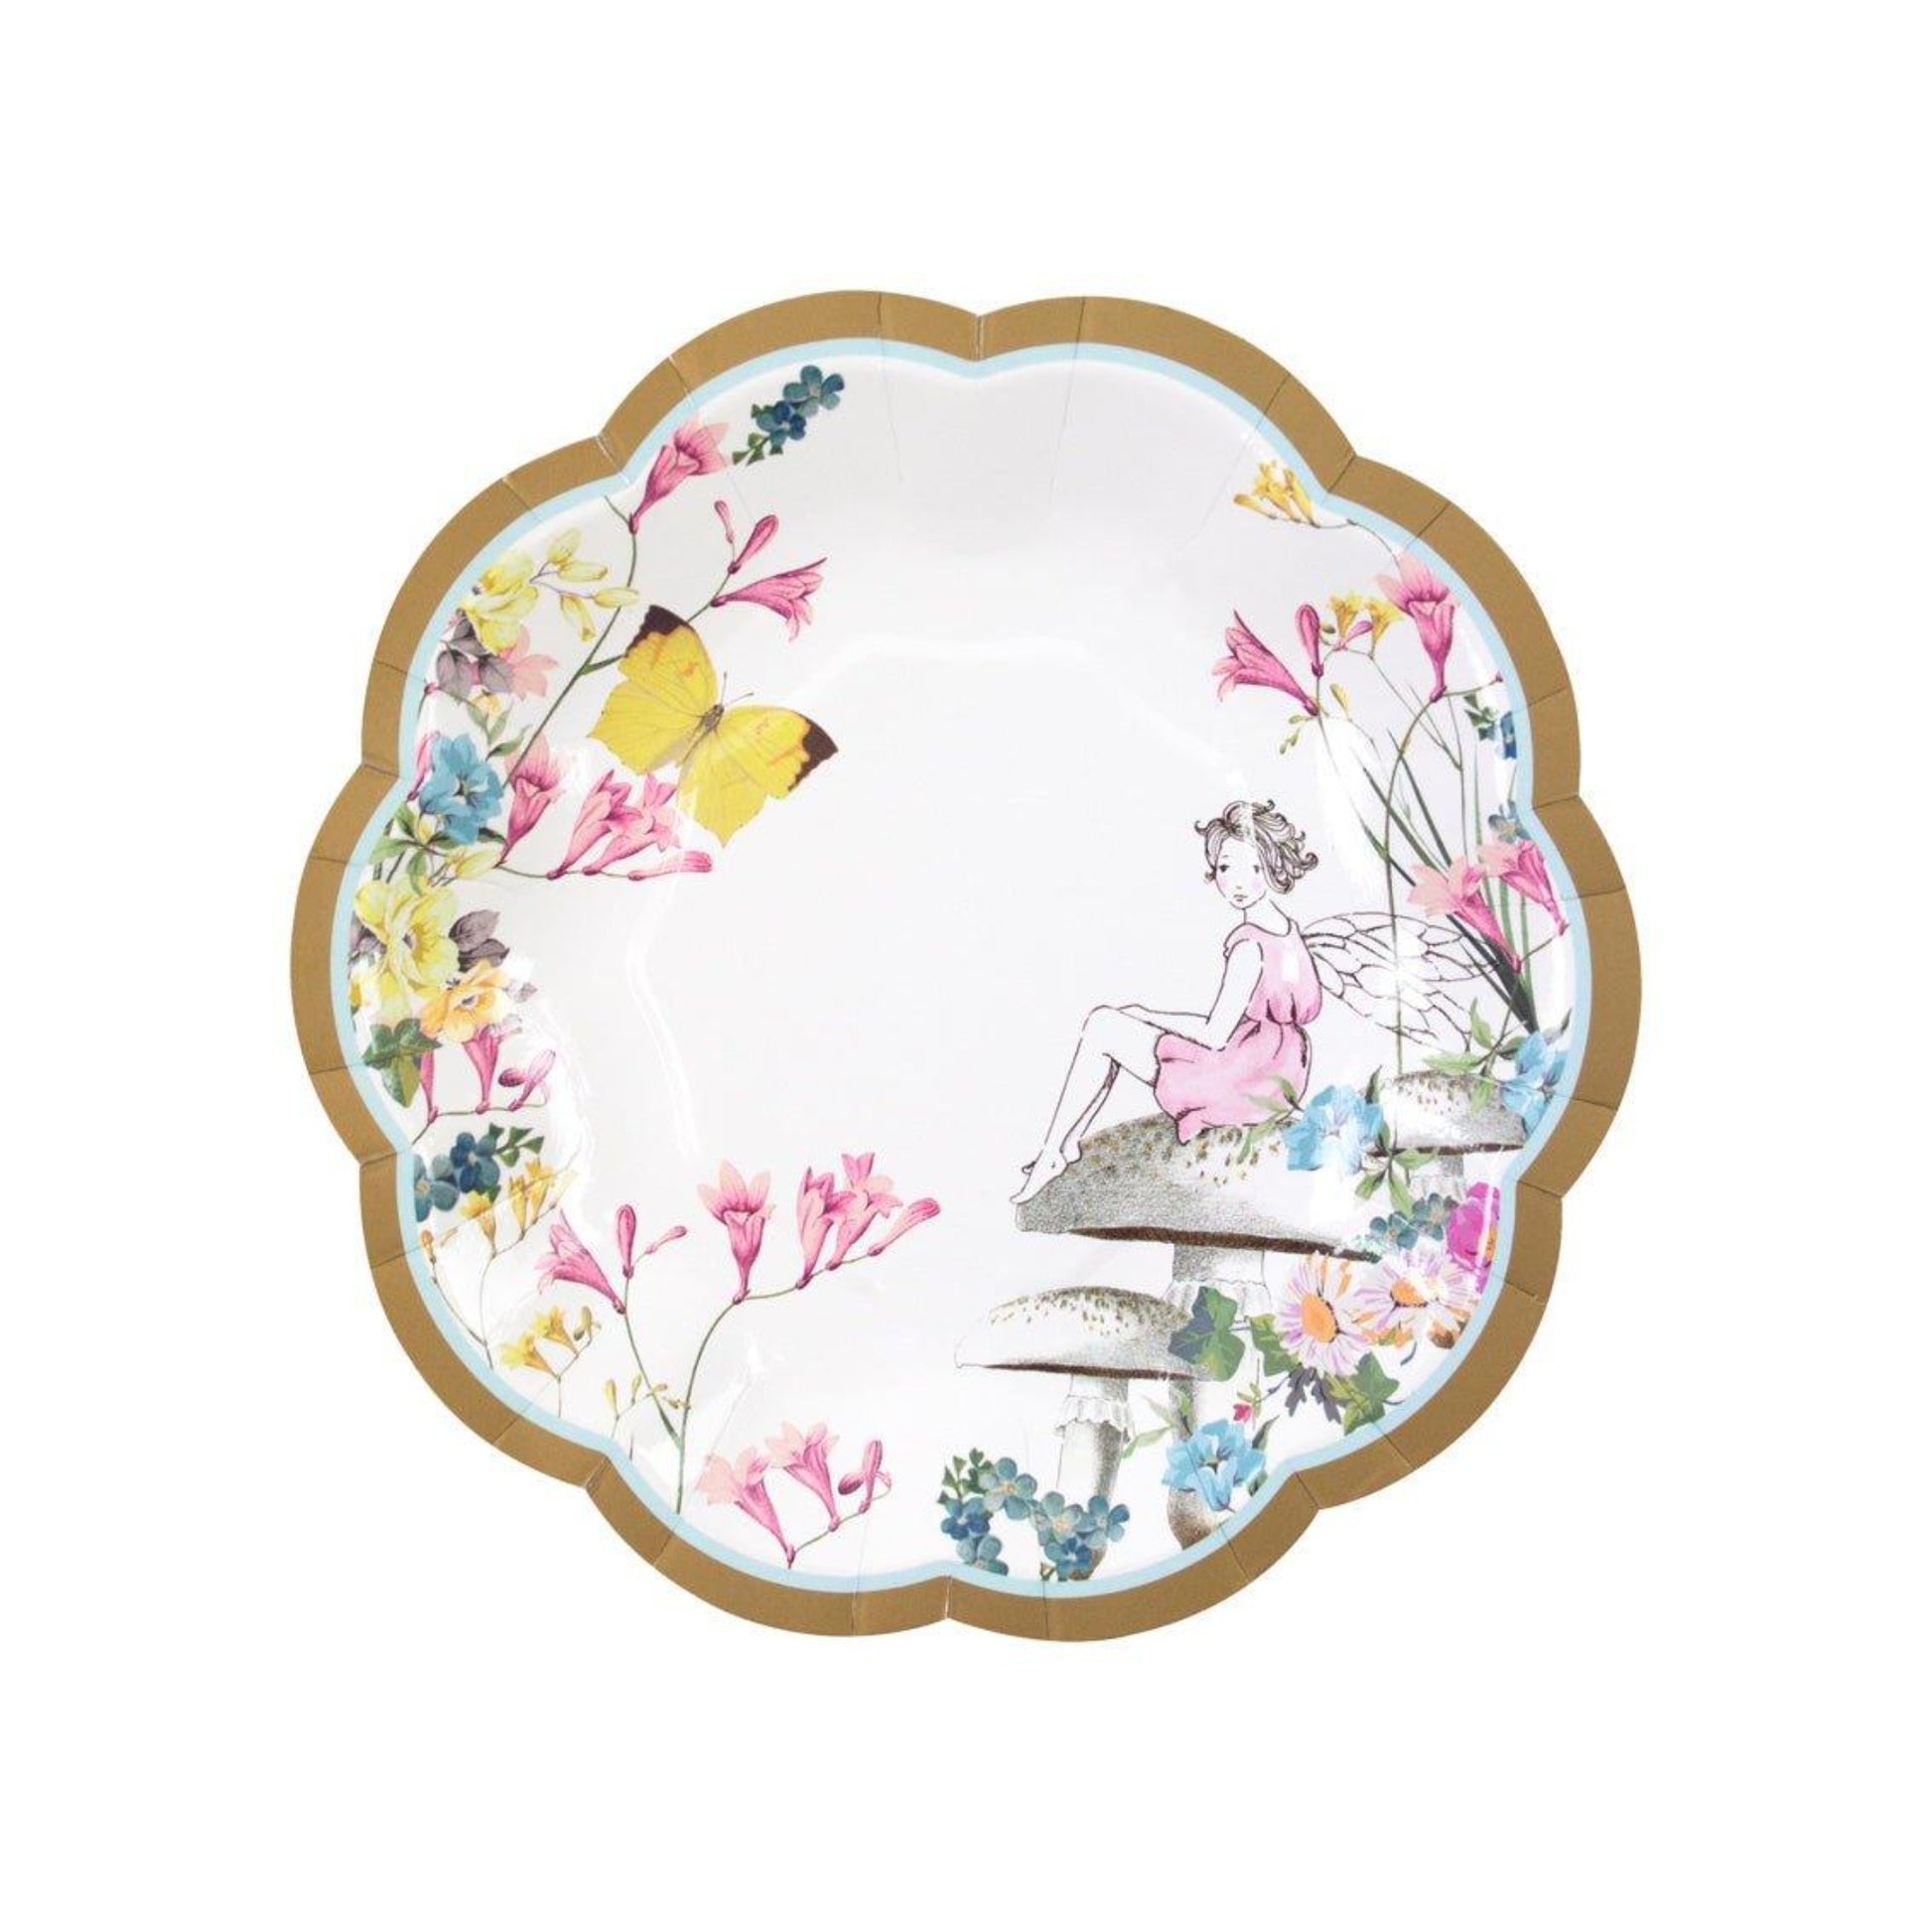 Talking Tables fairy plate with pink fairy, yellow butterfly and flowers